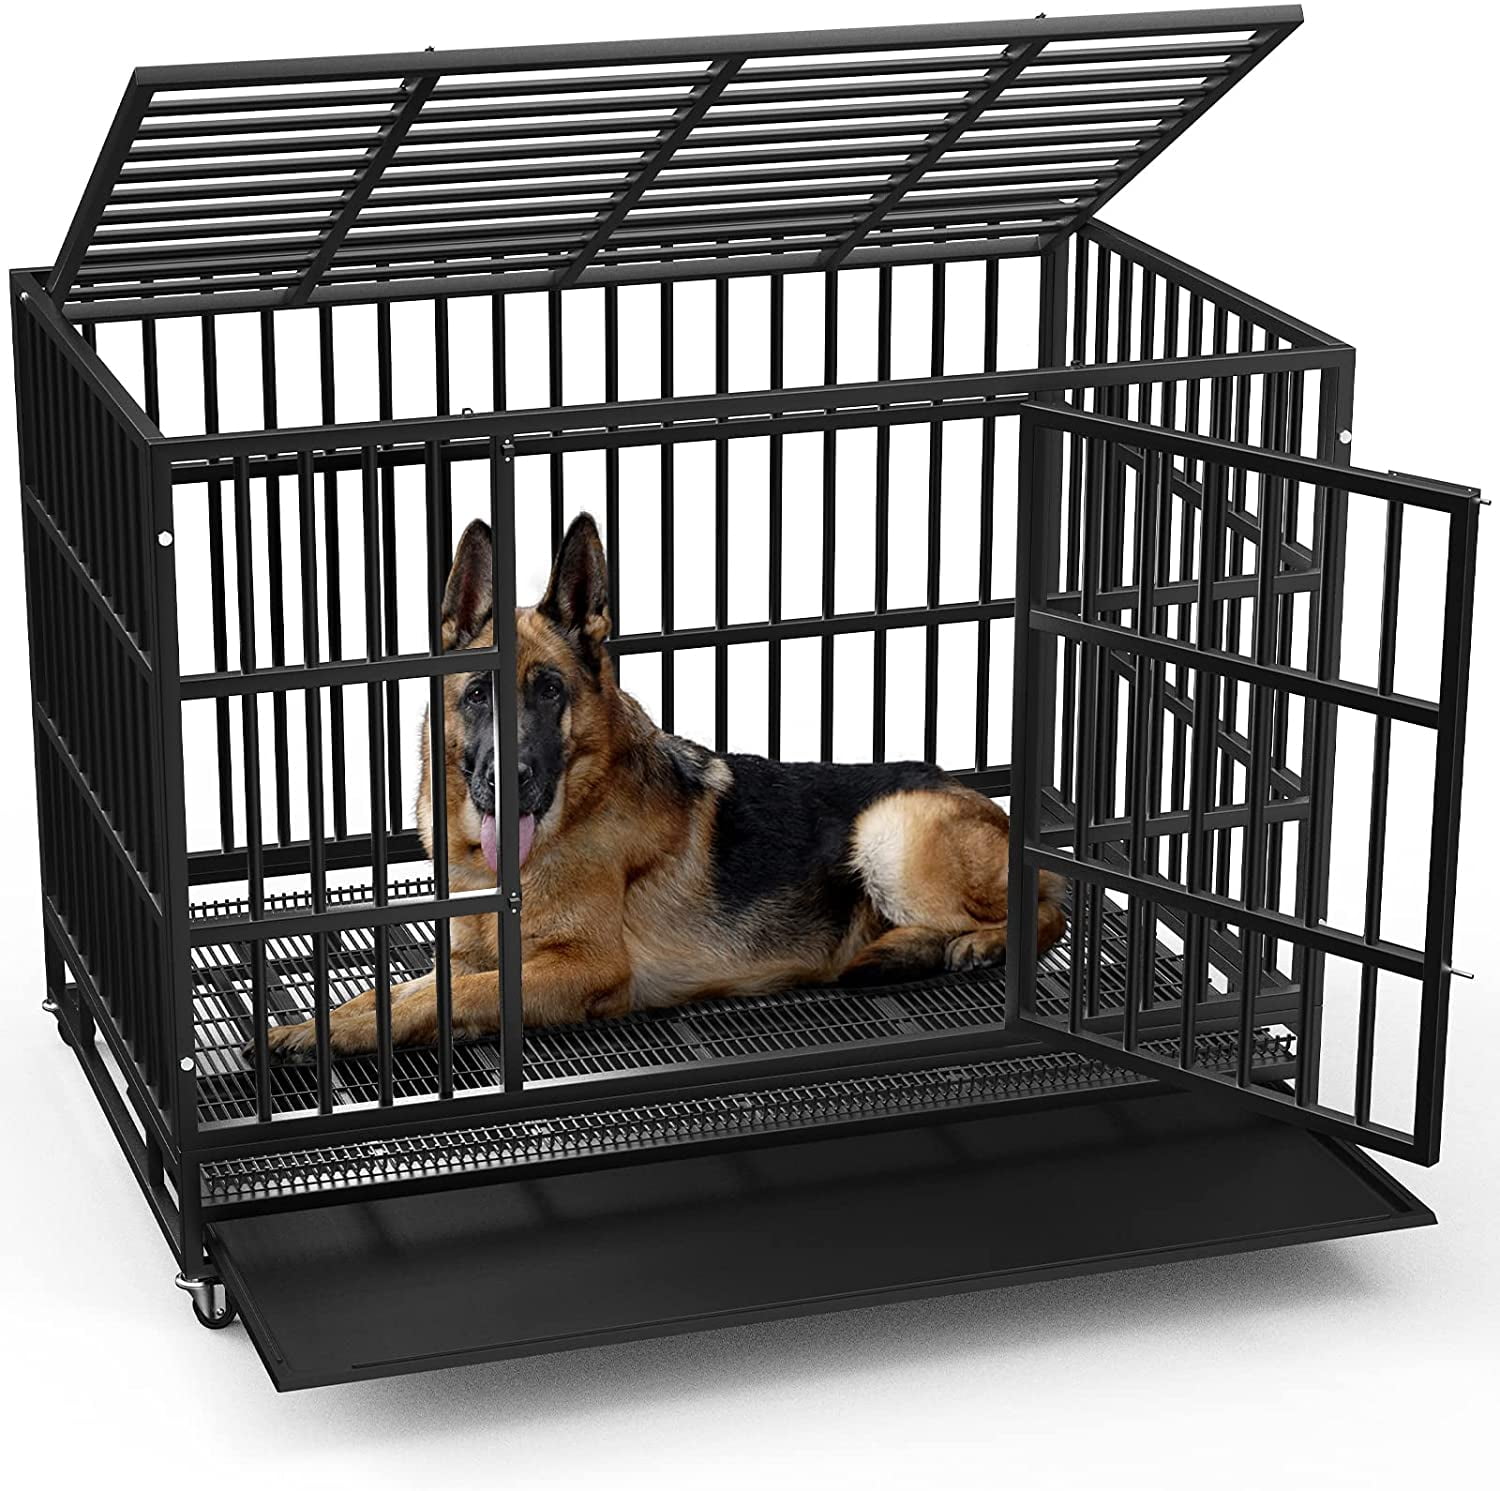 Otaid 48 Inch Heavy Duty Indestructible Dog Crate Cage Kennel with Wheels High Anxiety Dog Crate Double Door and Removable Tray Design Sturdy Locks Design Extra Large XL XXL Dog Crate. 